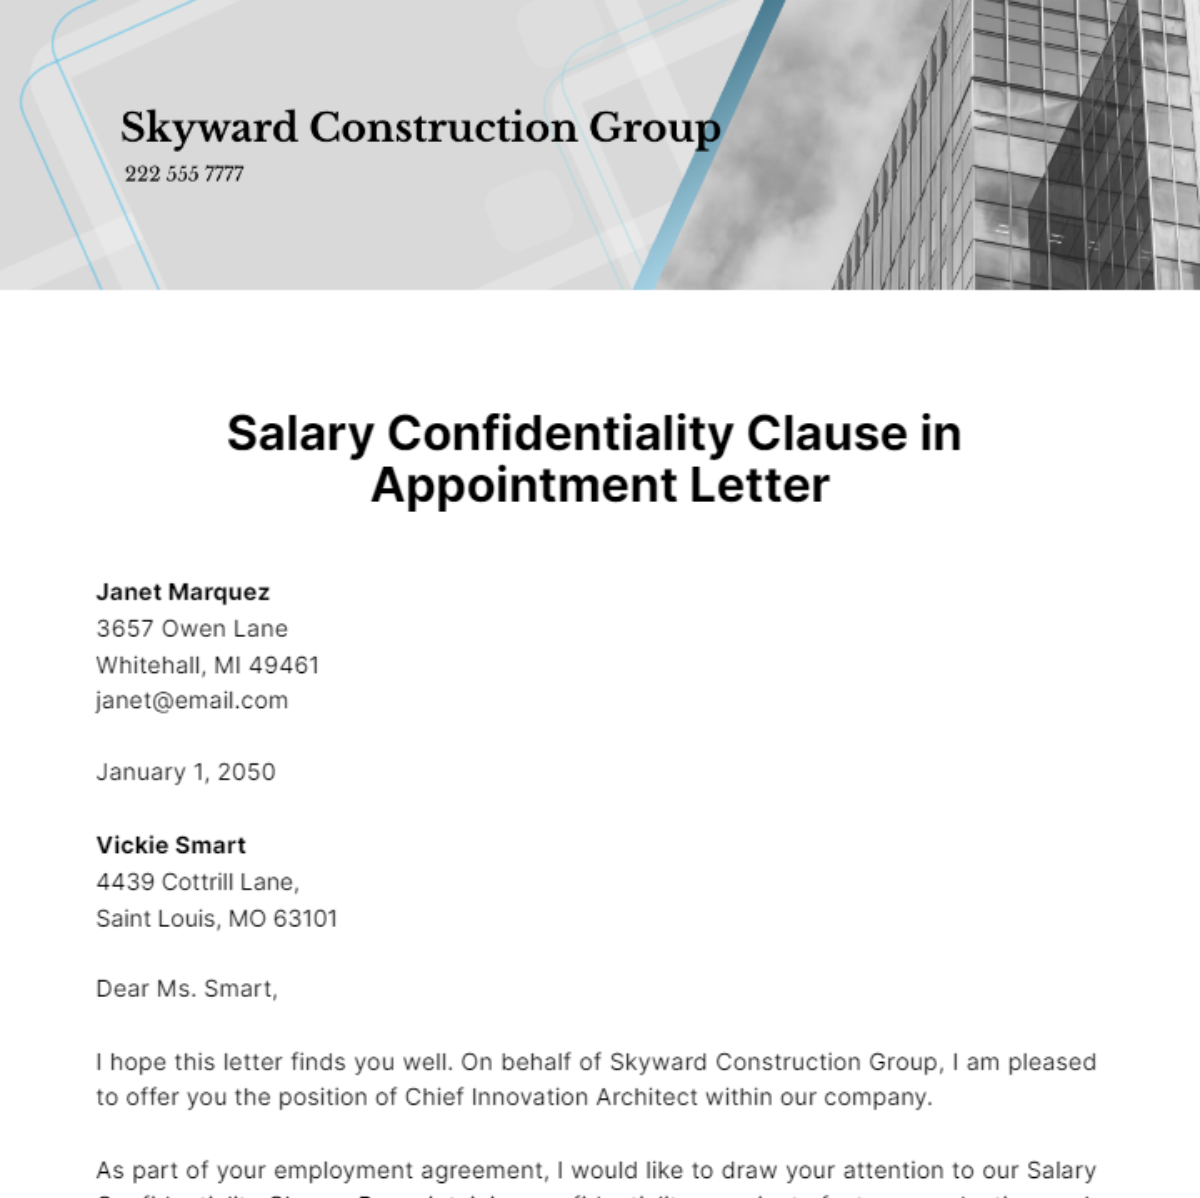 Salary Confidentiality Clause in Appointment Letter Template